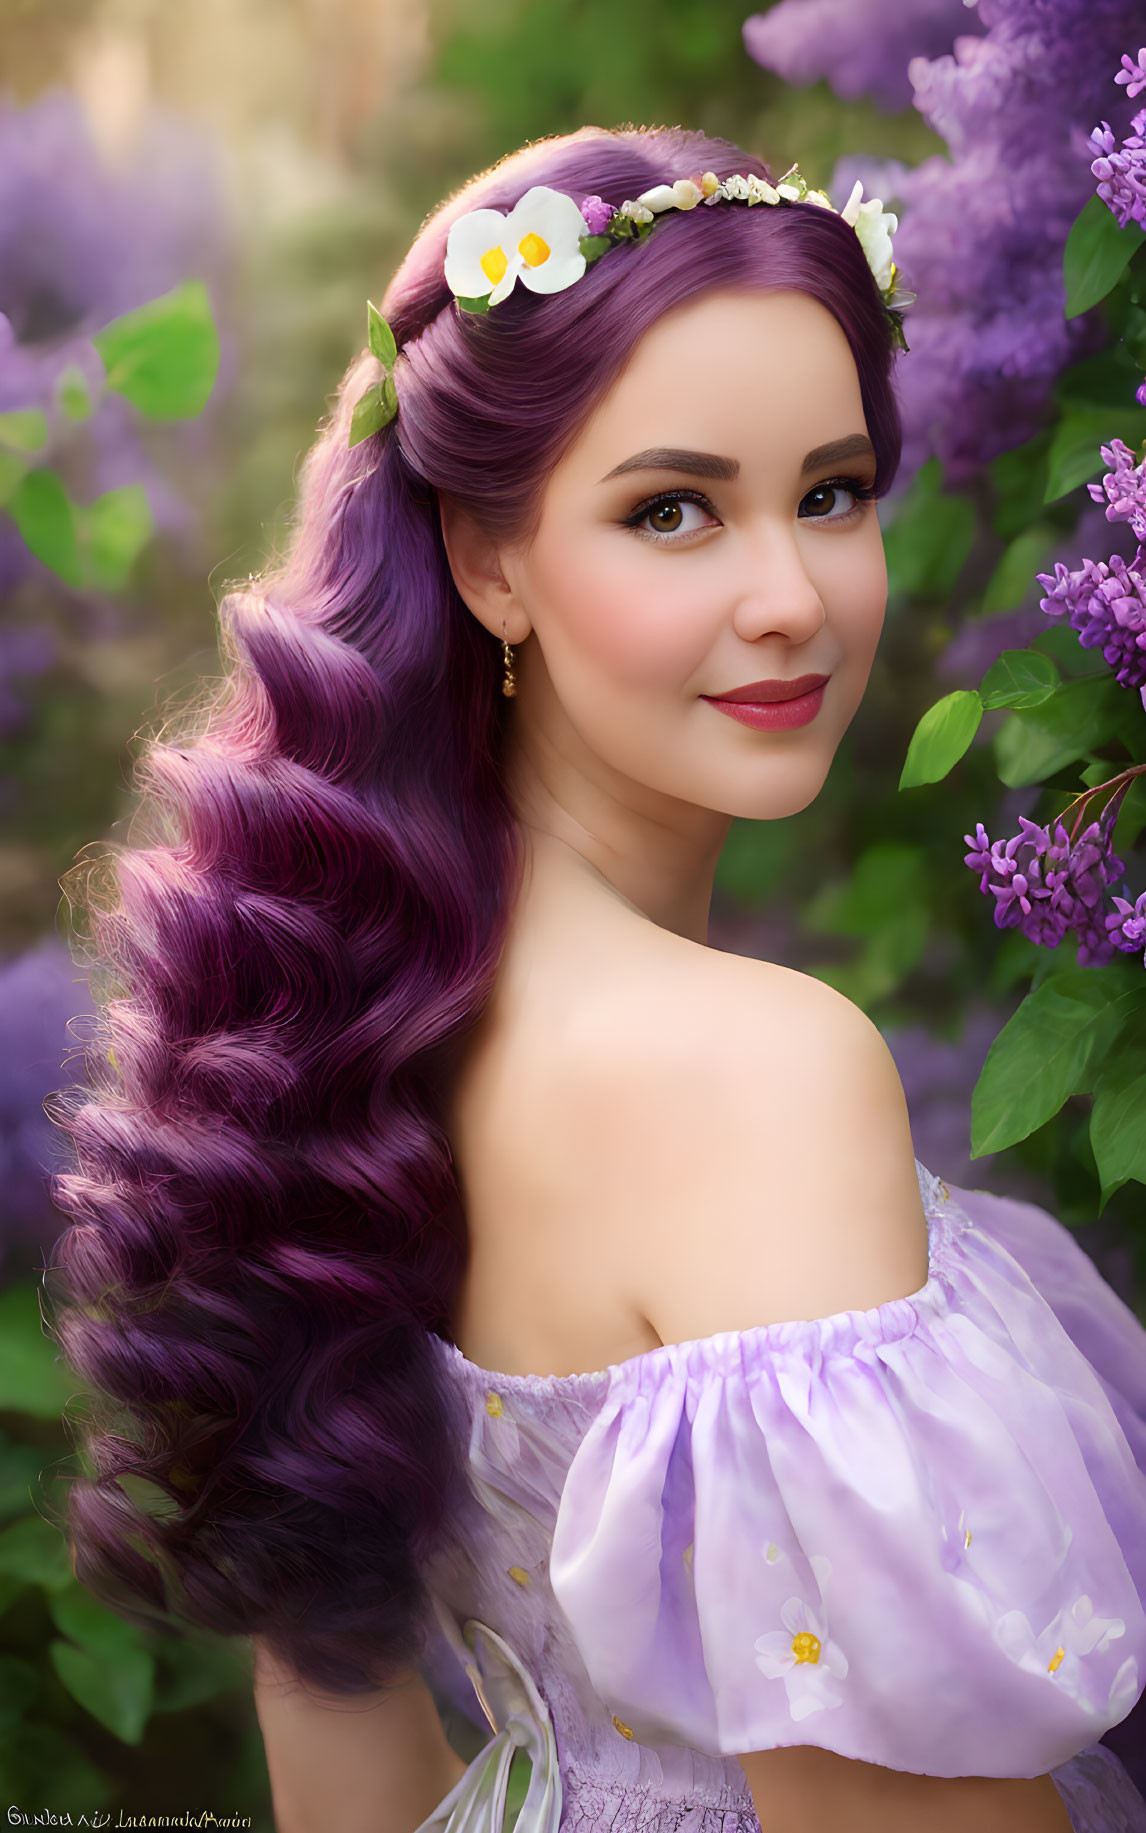 Purple-haired woman in flower crown smiling among blooming lilacs